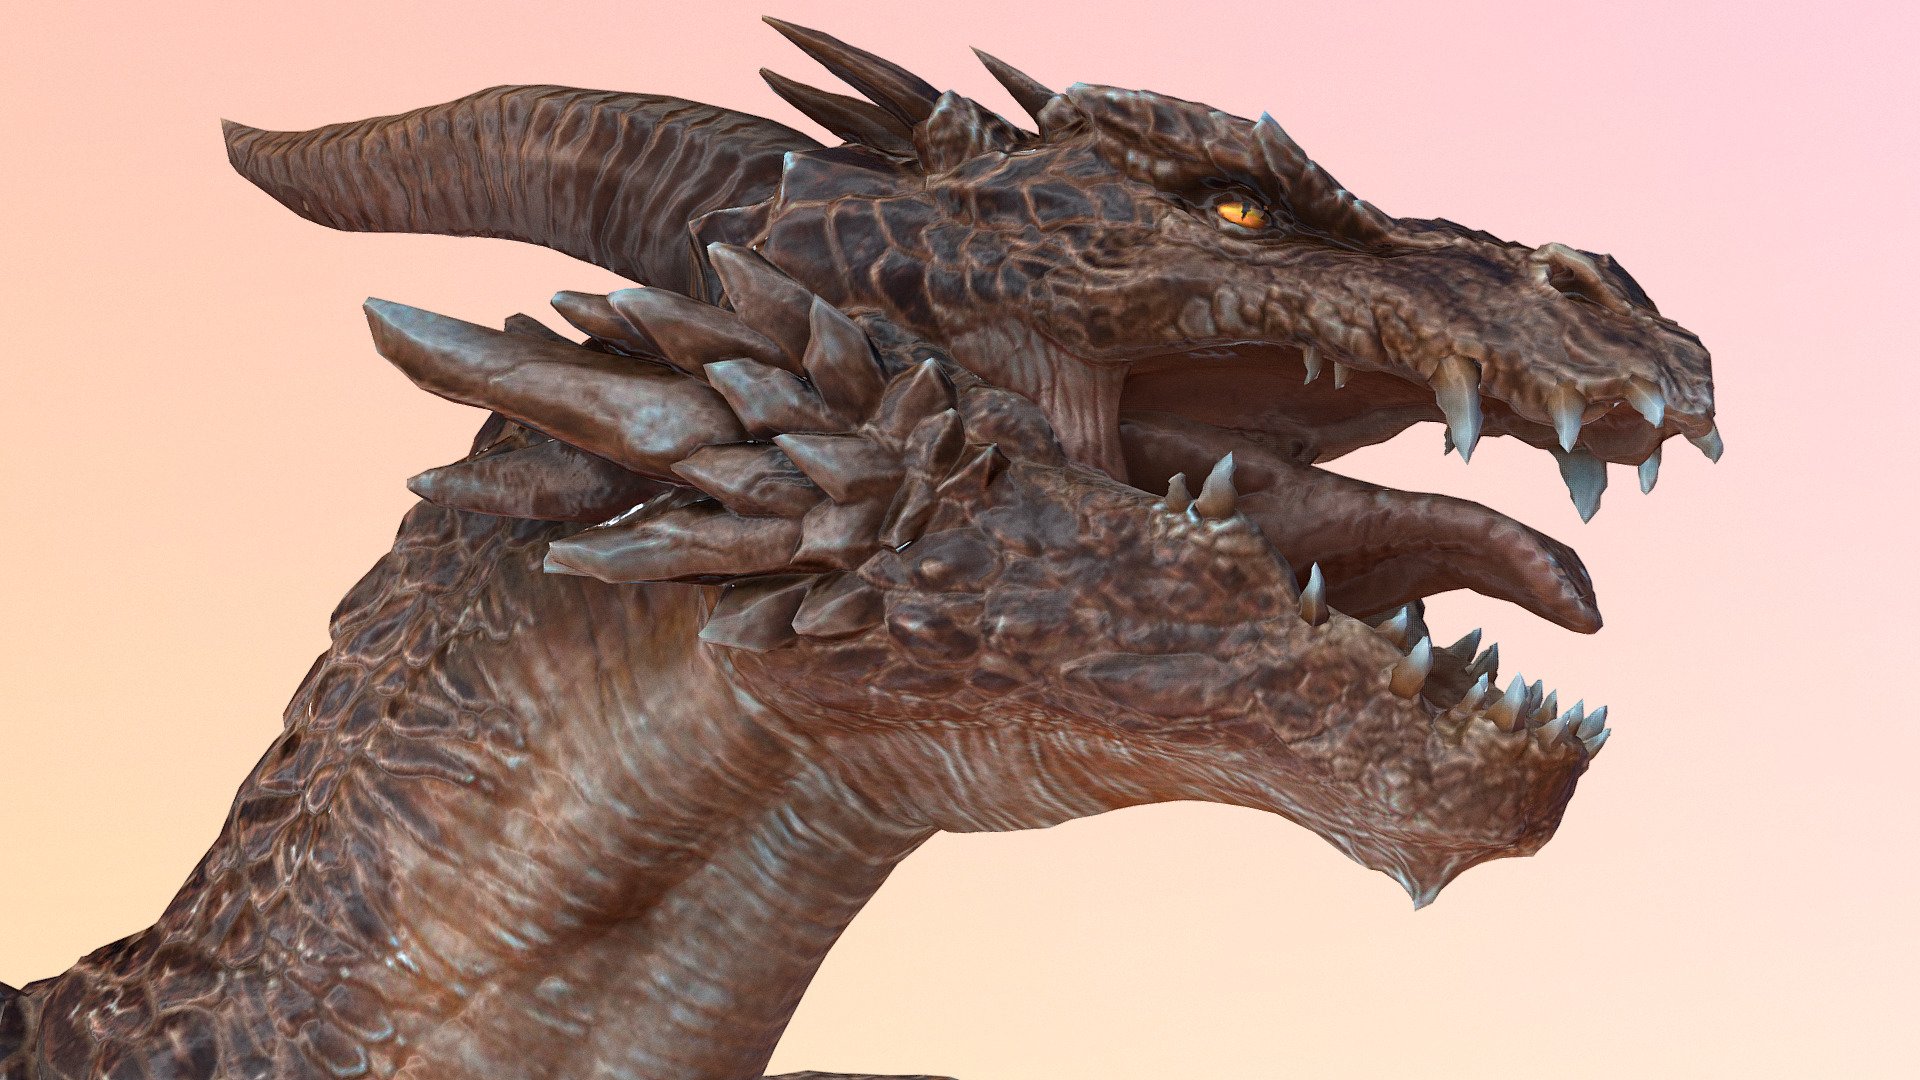 Rigged Lowpoly Dragon 3d model
in fbx file format - Dragon Rigged - 3D model by monstermod 3d model